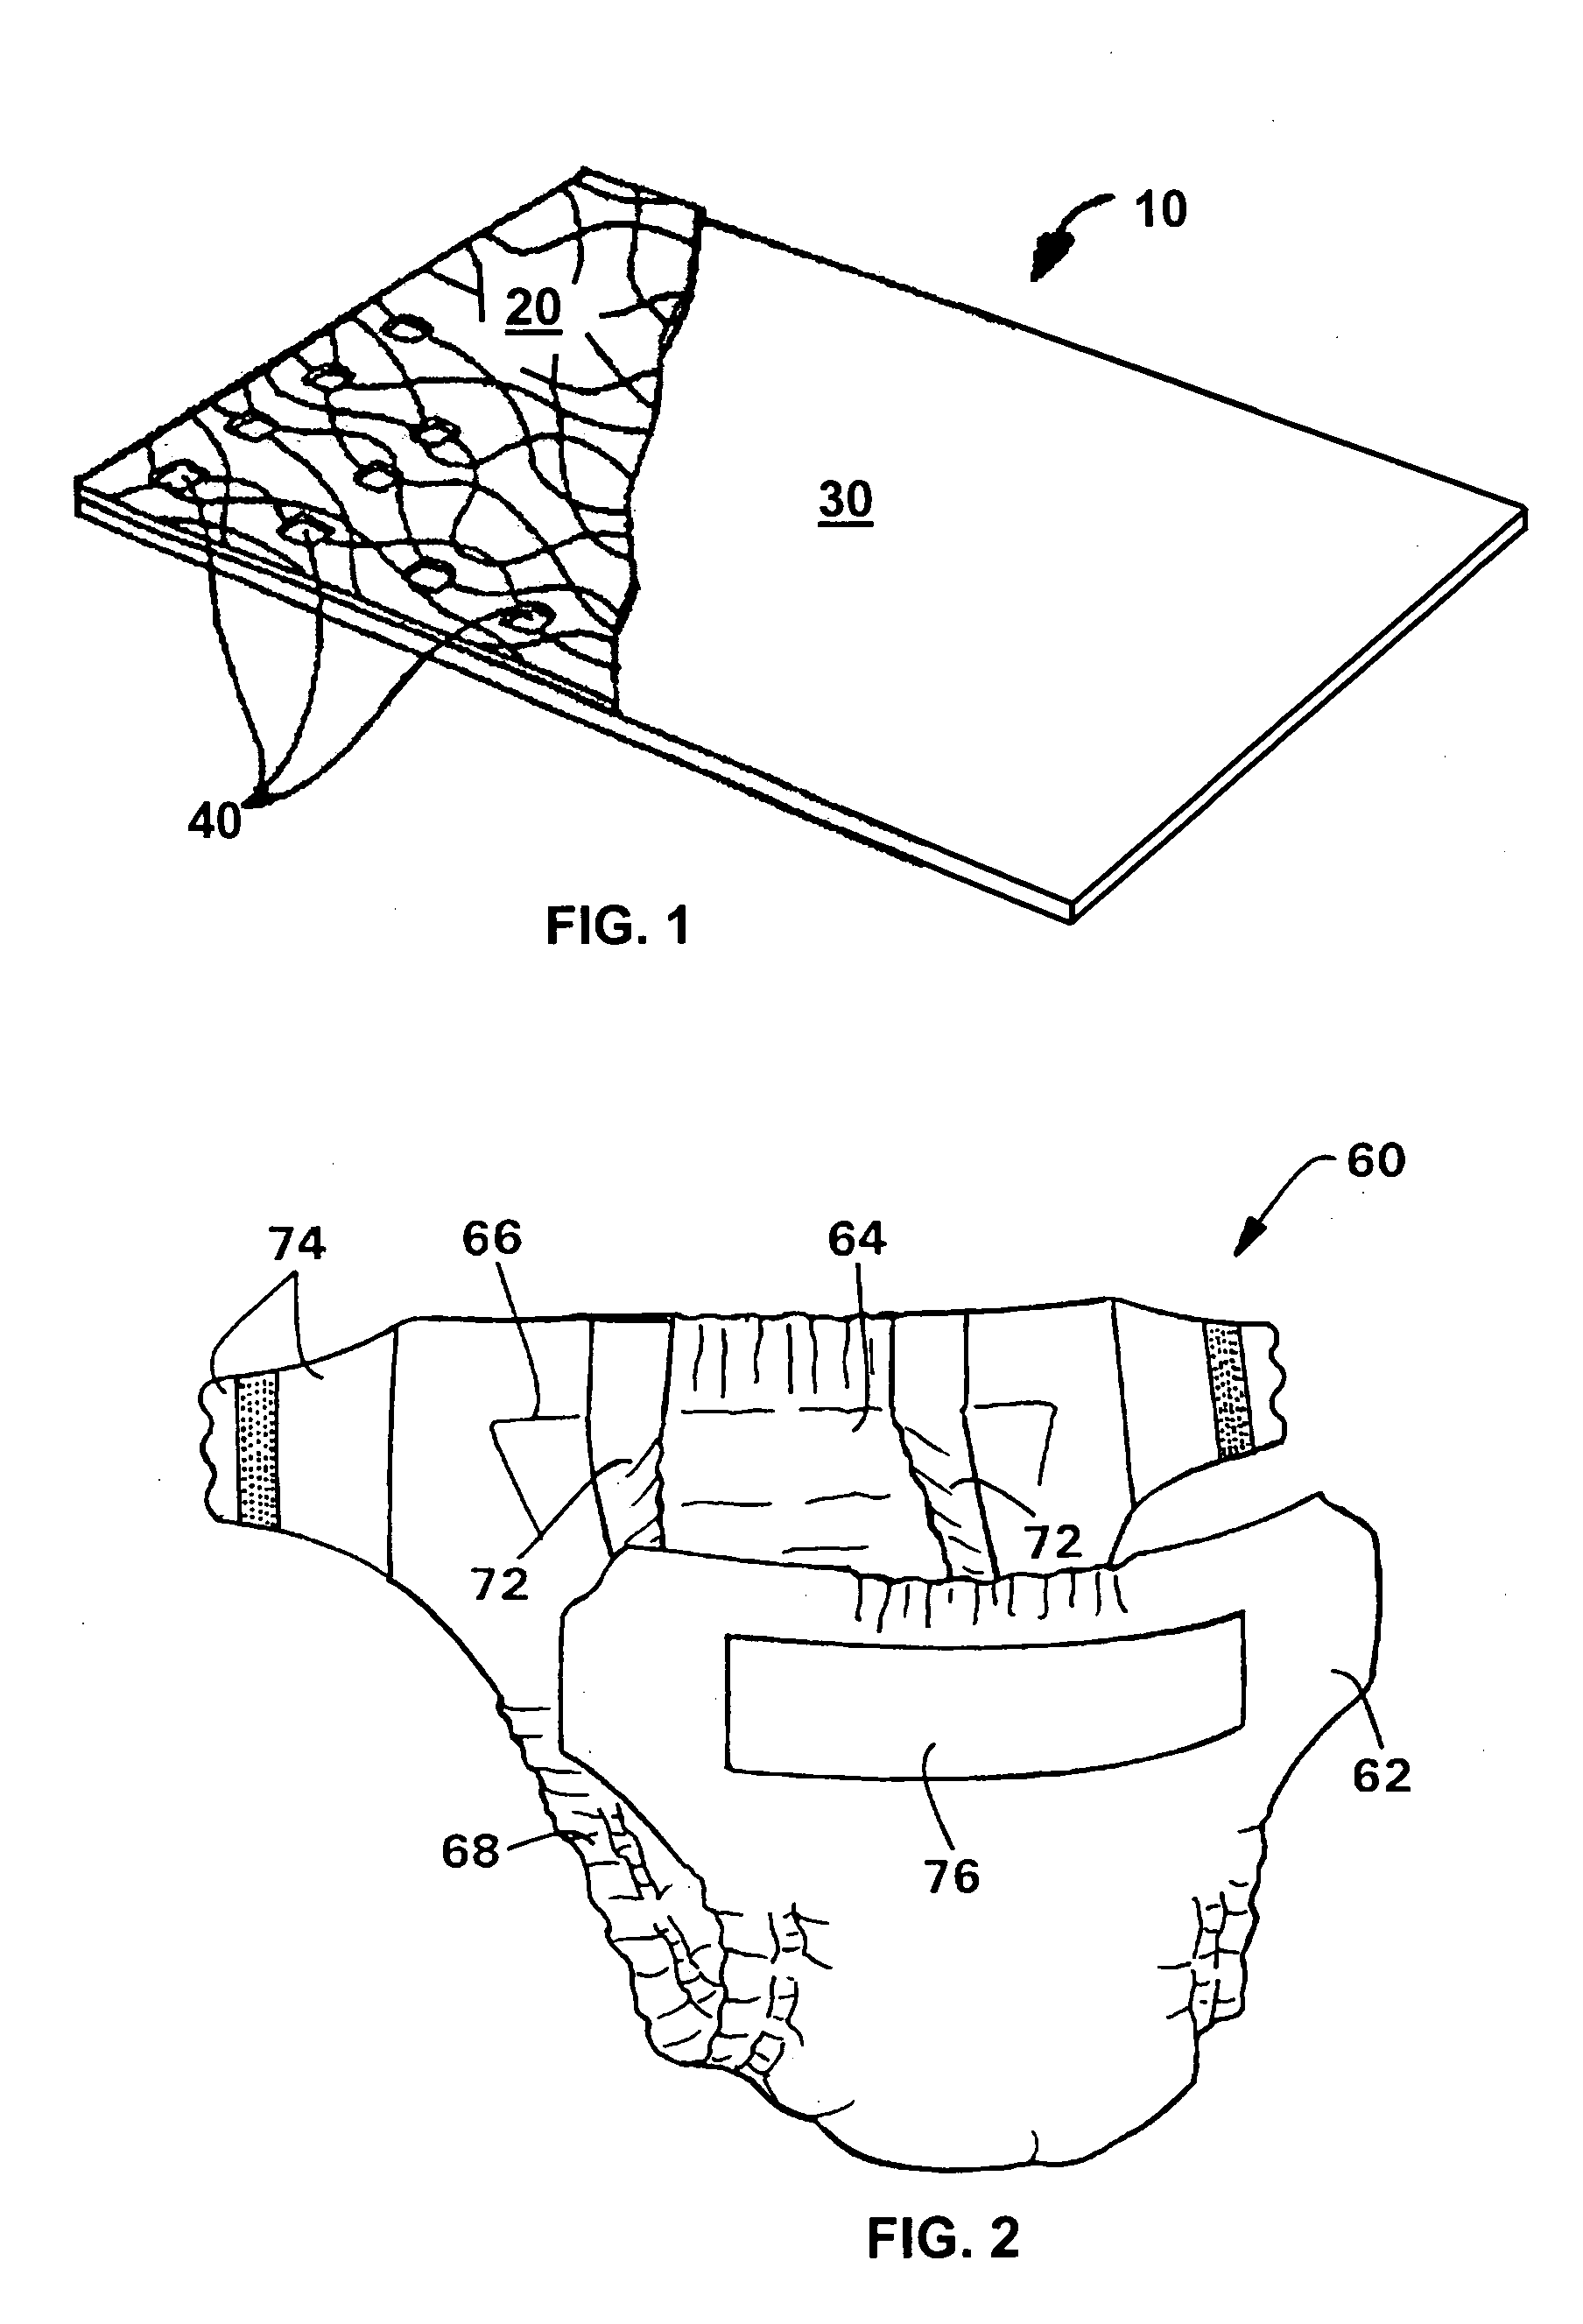 Biodegradable polymer compositions for a breathable film